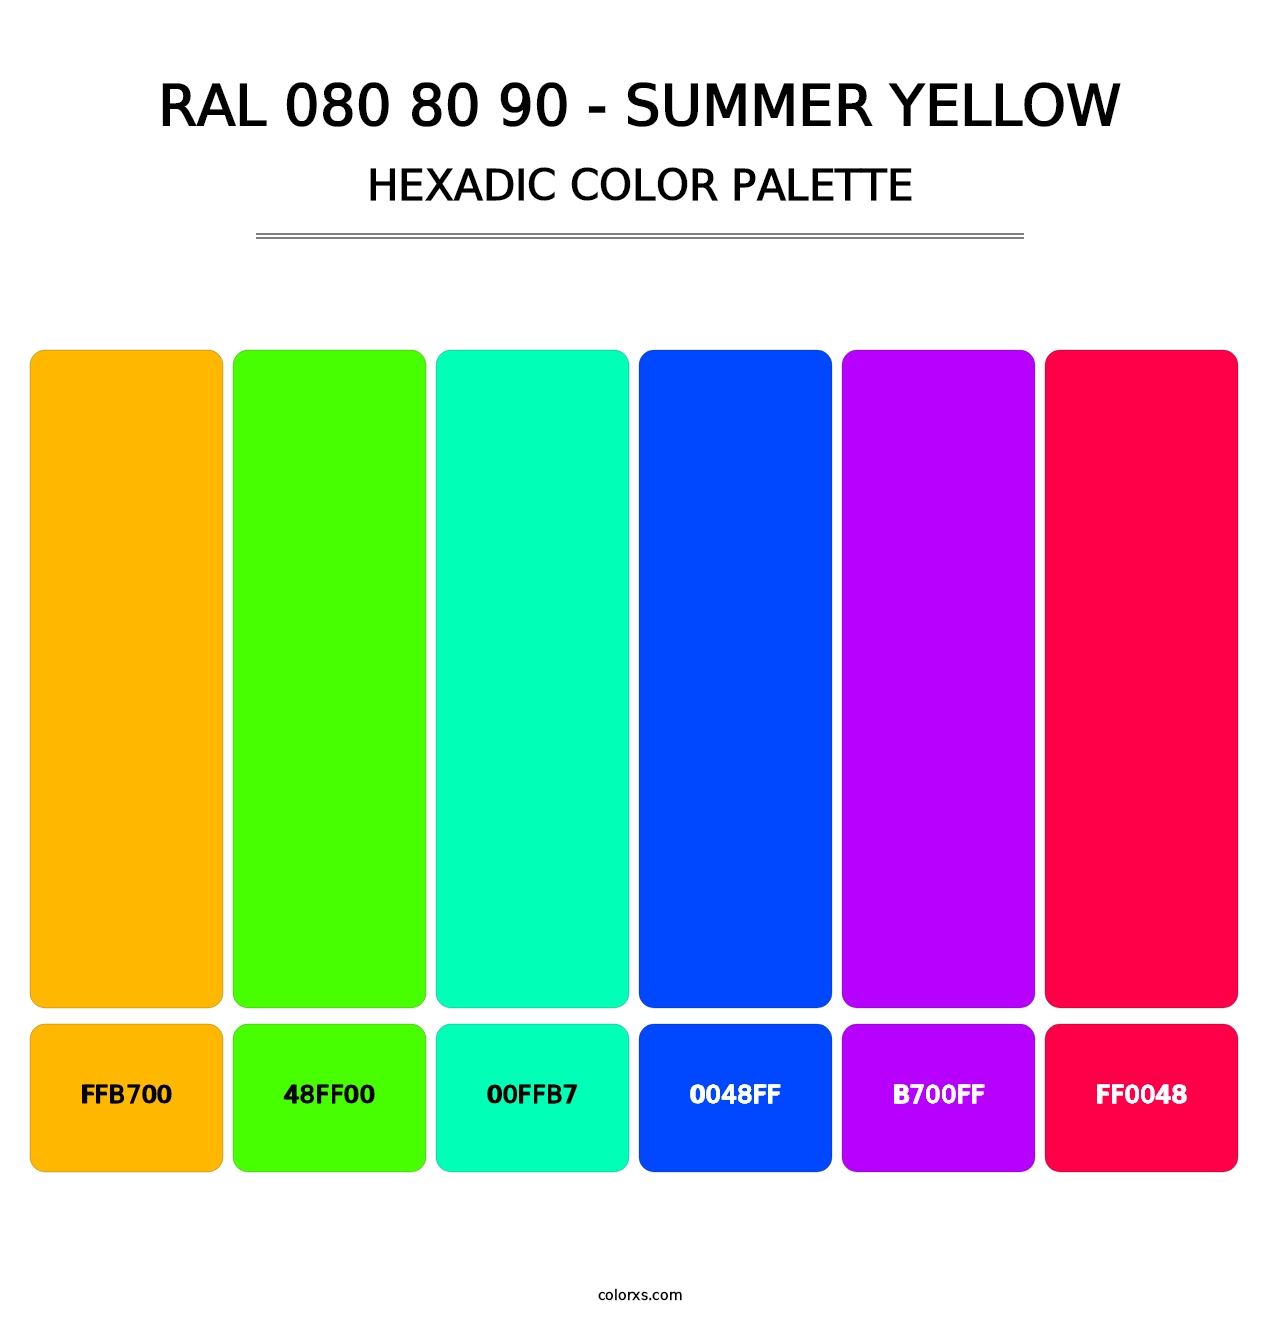 RAL 080 80 90 - Summer Yellow - Hexadic Color Palette